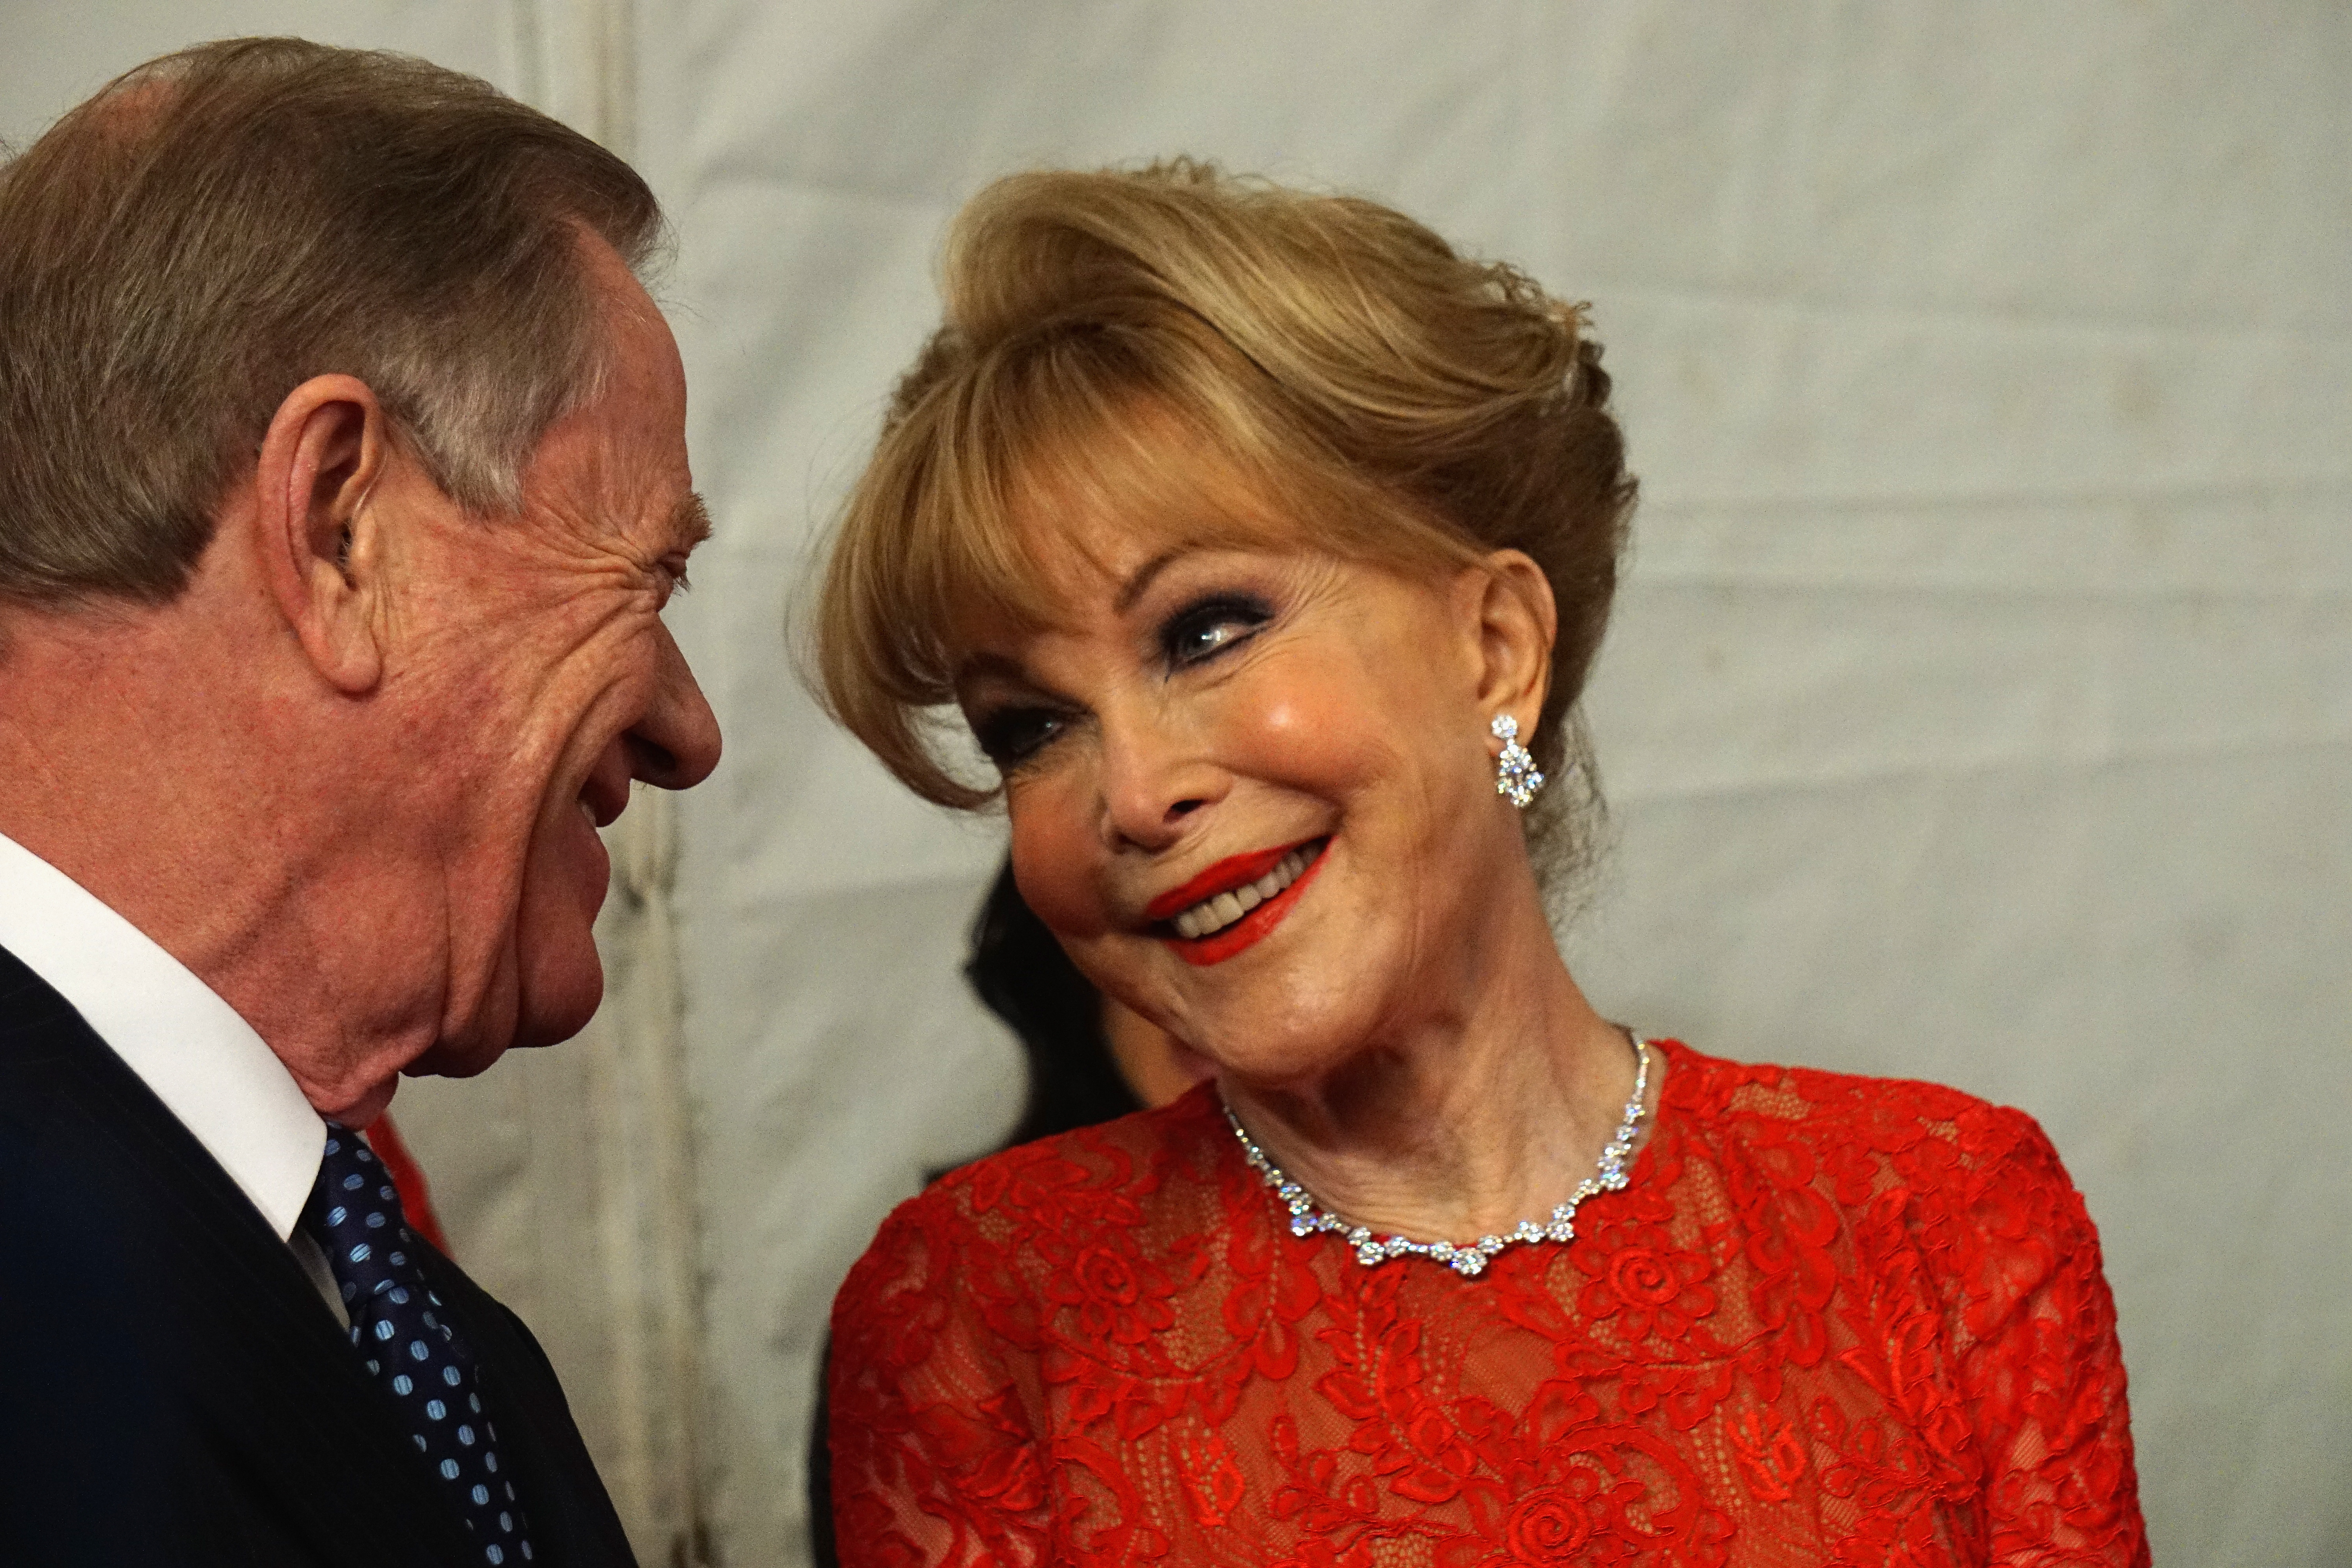 Barbara Eden and Jon Eicholtz on February 12, 2015 in New York City | Source: Getty Images